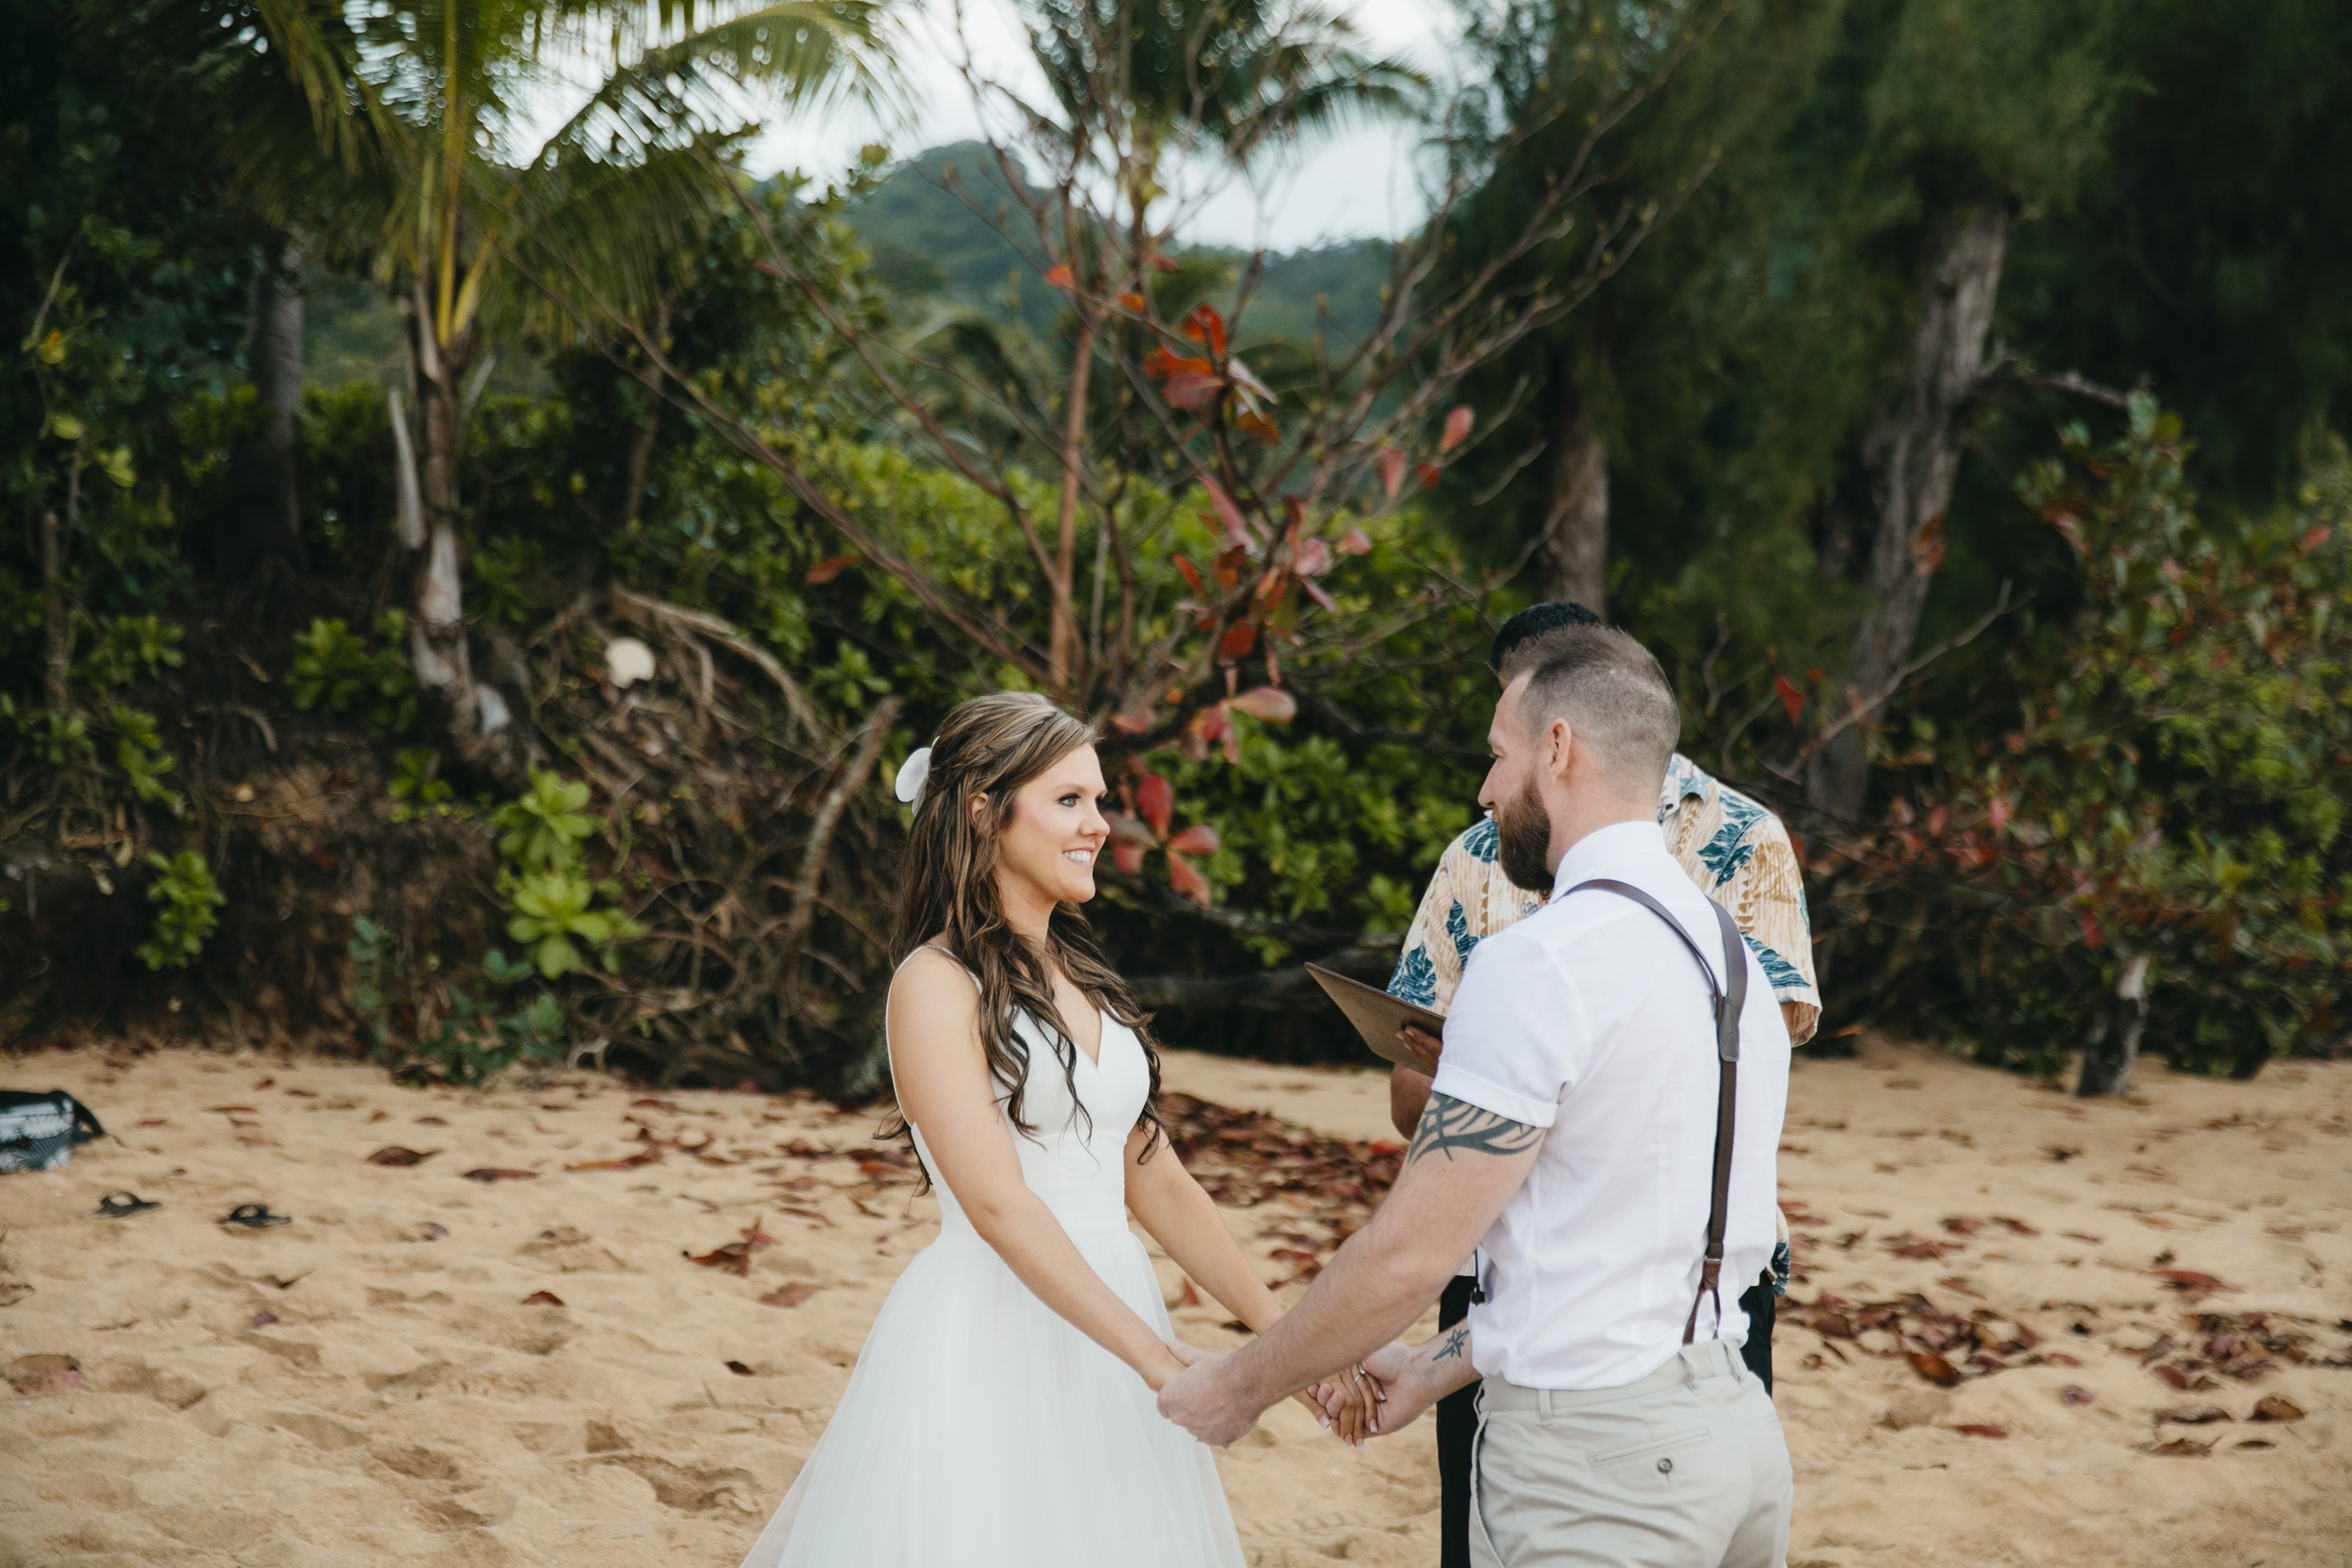 Vows are exchanged during Tunnels Beach wedding ceremony with Kauai Elopement photographers Colby and Jess